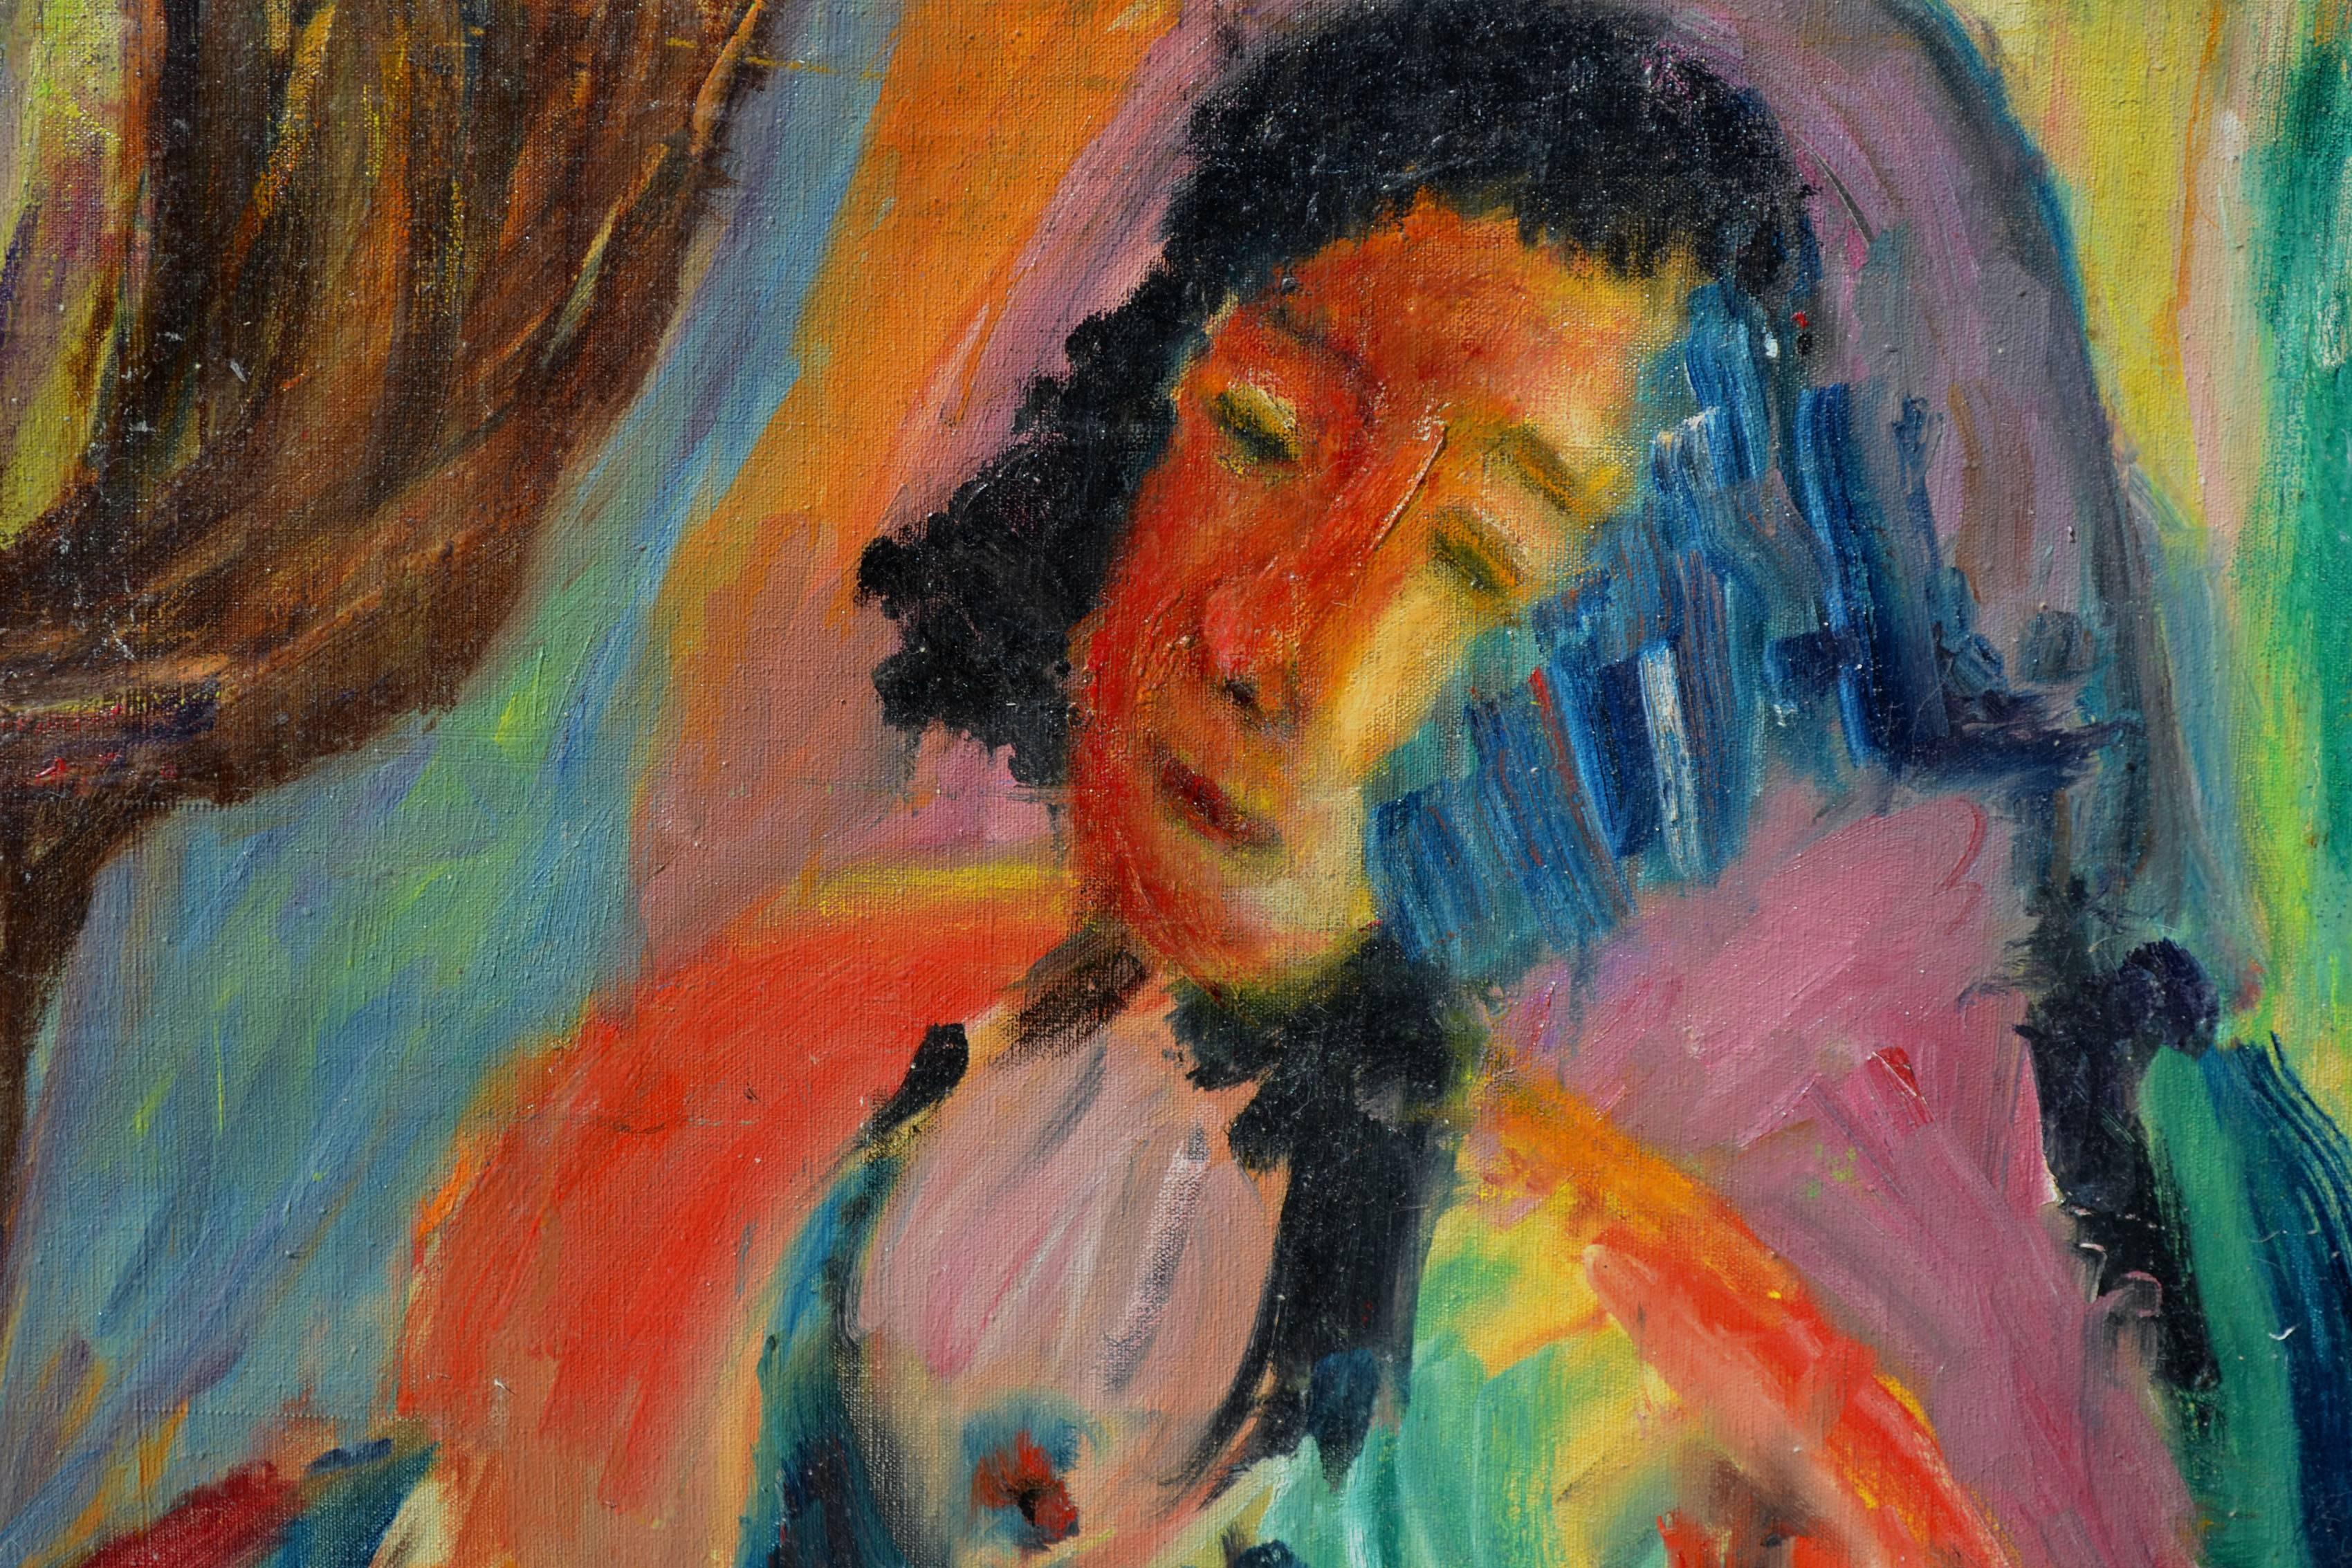 Mid Century Multi-Color Abstrakt Expressionist Figurative (Abstrakter Expressionismus), Painting, von Honora Berg